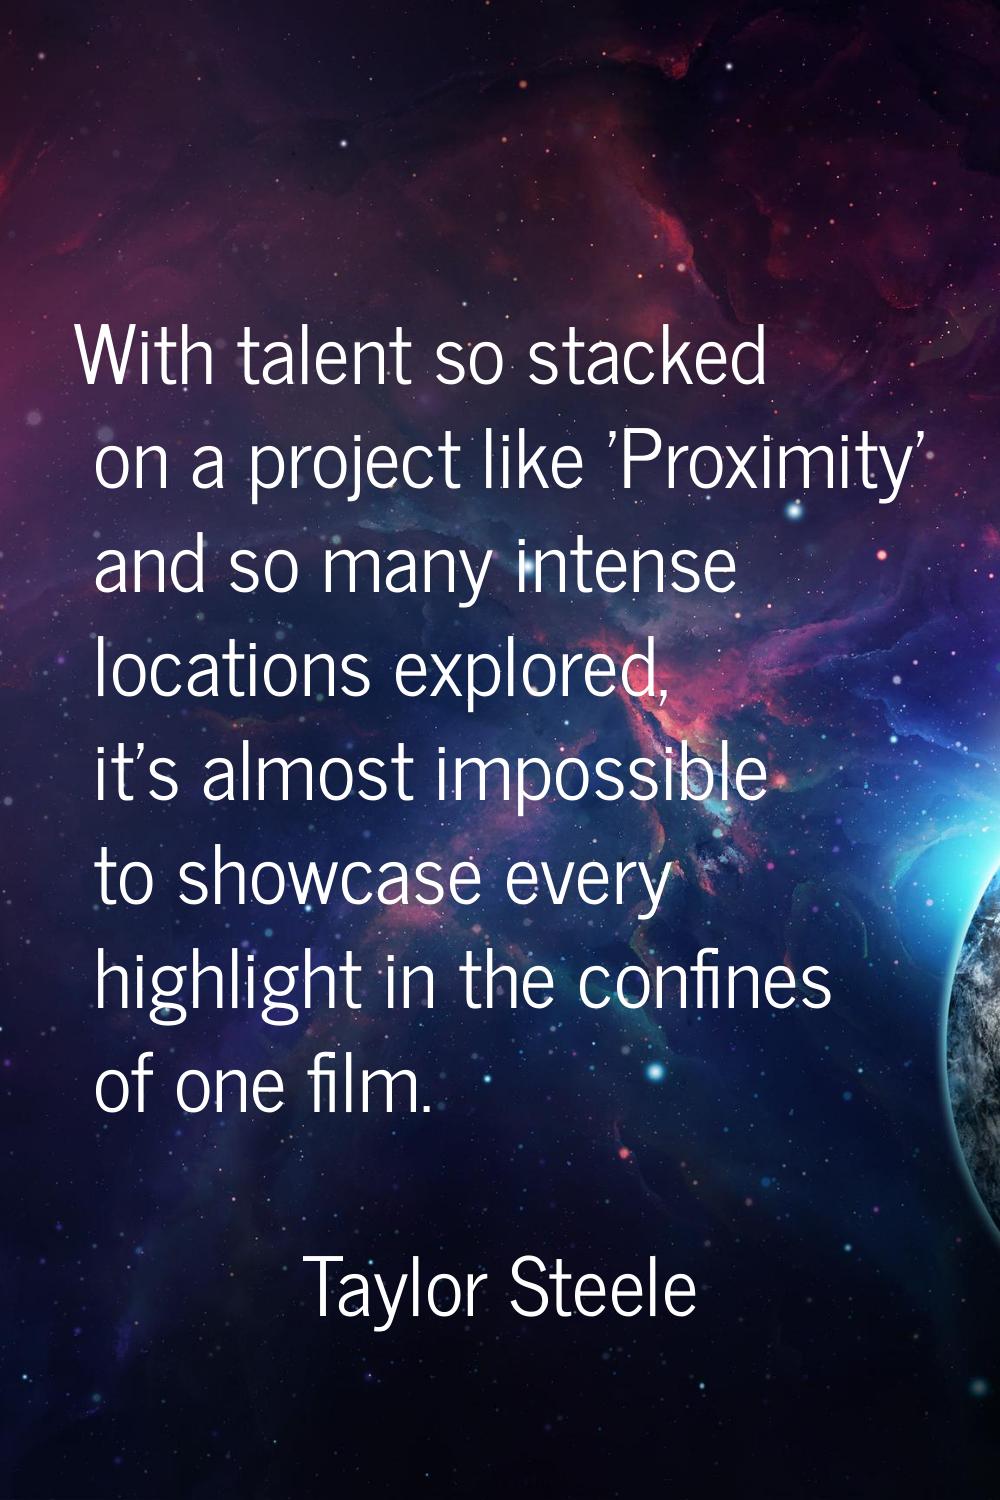 With talent so stacked on a project like 'Proximity' and so many intense locations explored, it's a